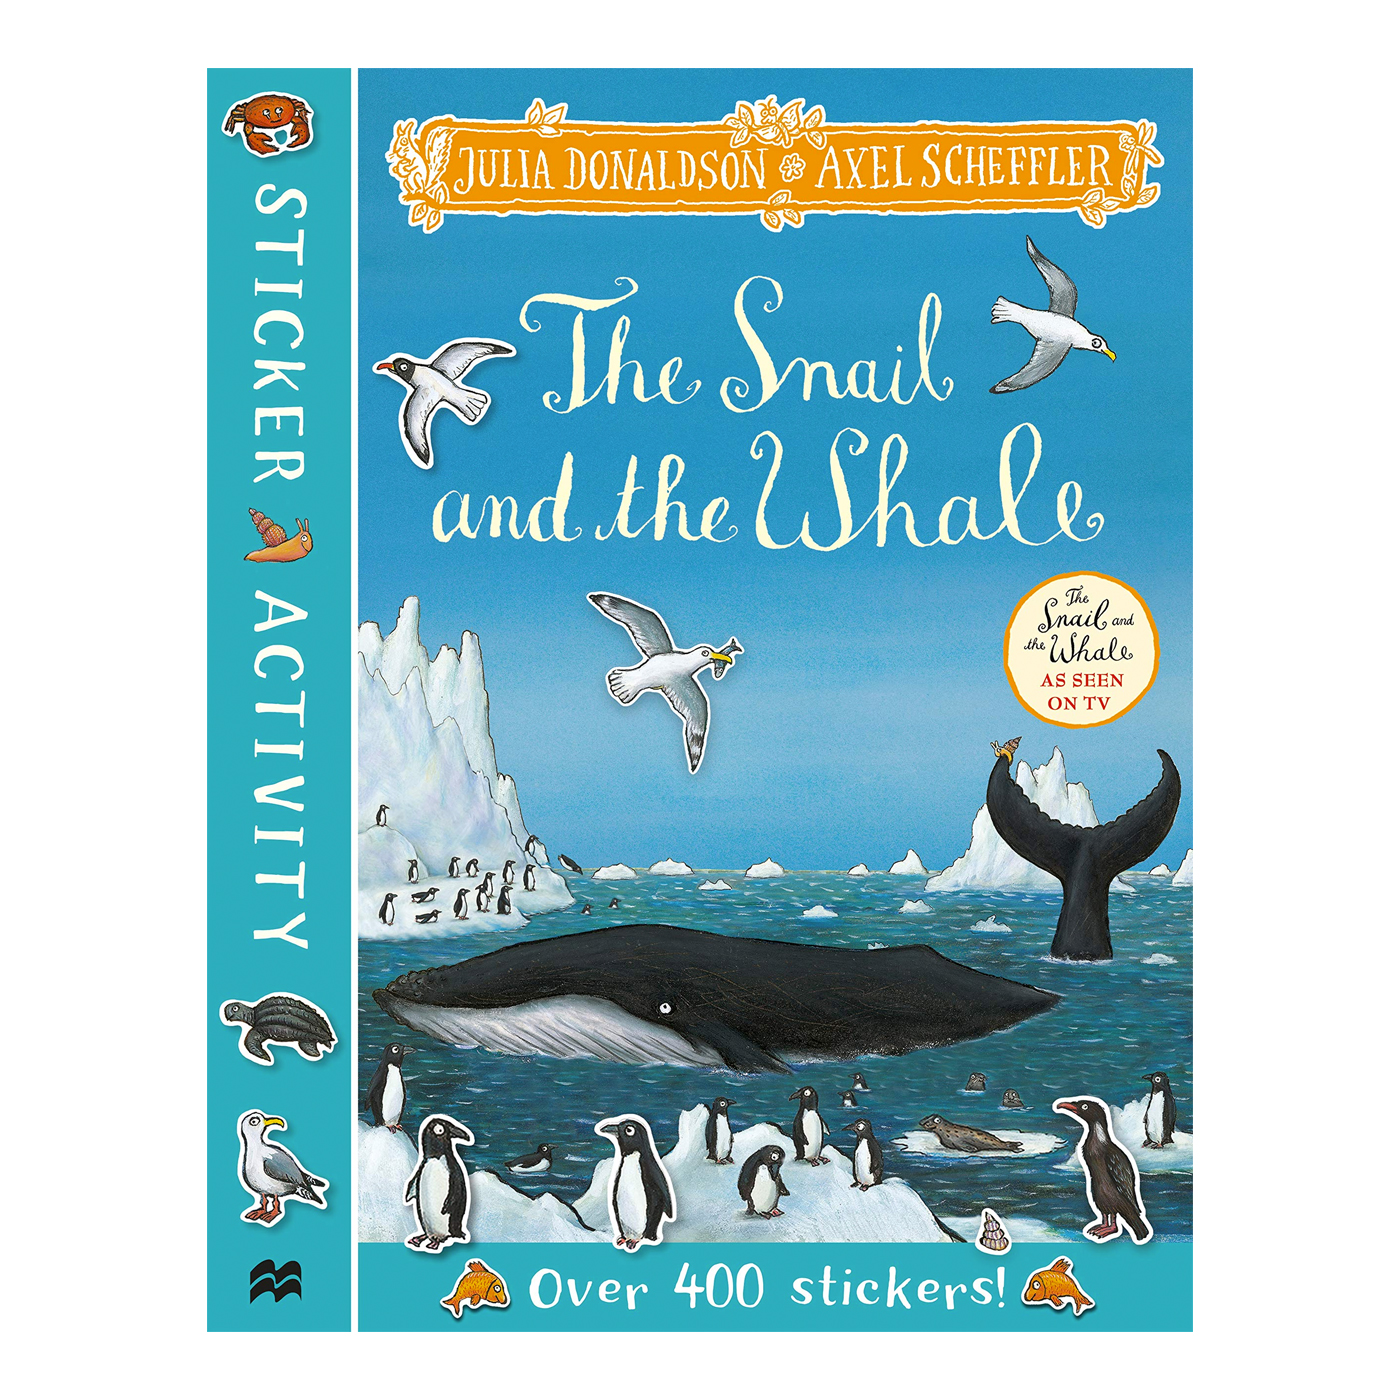 PAN MACMILLAN The Snail and the Whale Sticker Book